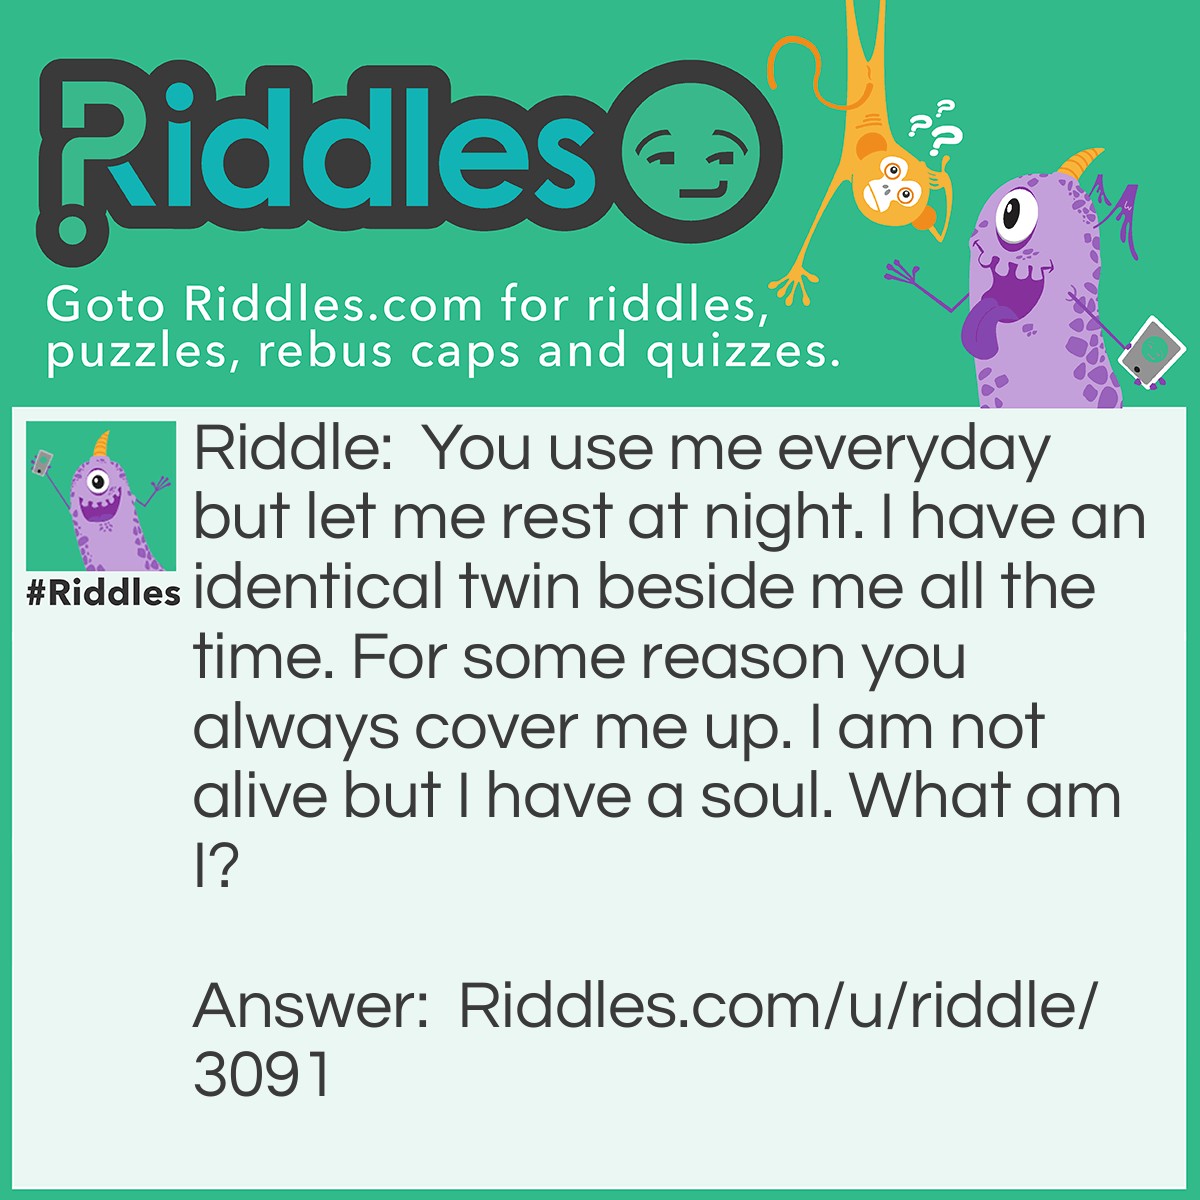 Riddle: You use me everyday but let me rest at night. I have an identical twin beside me all the time. For some reason you always cover me up. I am not alive but I have a soul. What am I? Answer: Your Feet.